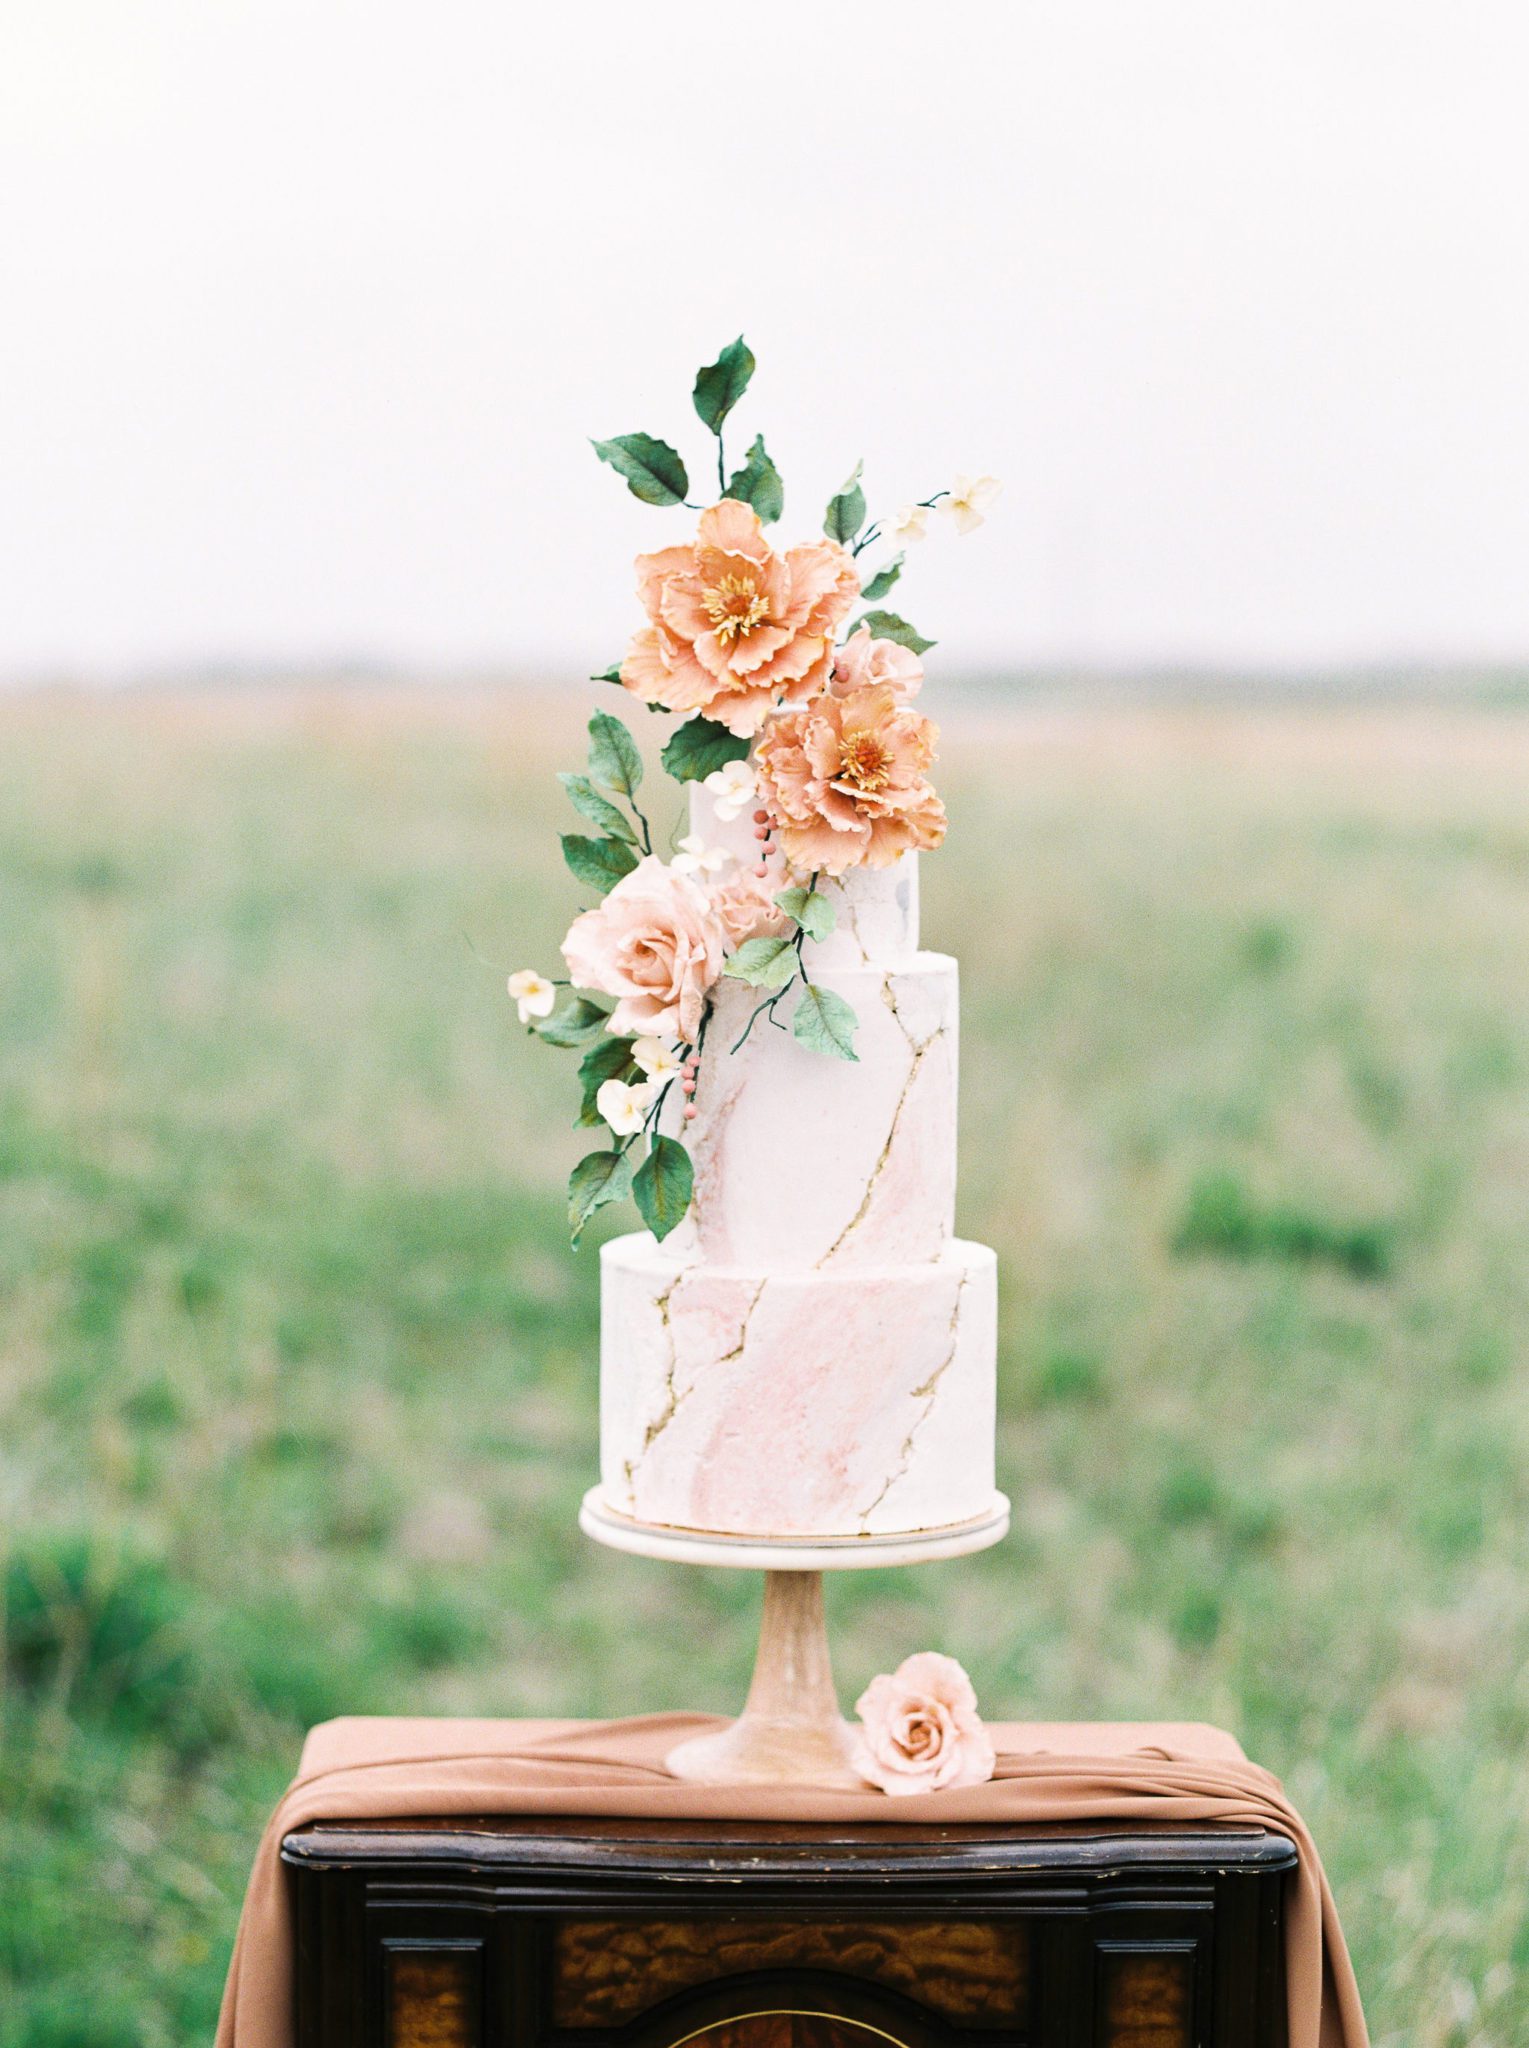 Towering marbled wedding cake with gold details and peach flowers